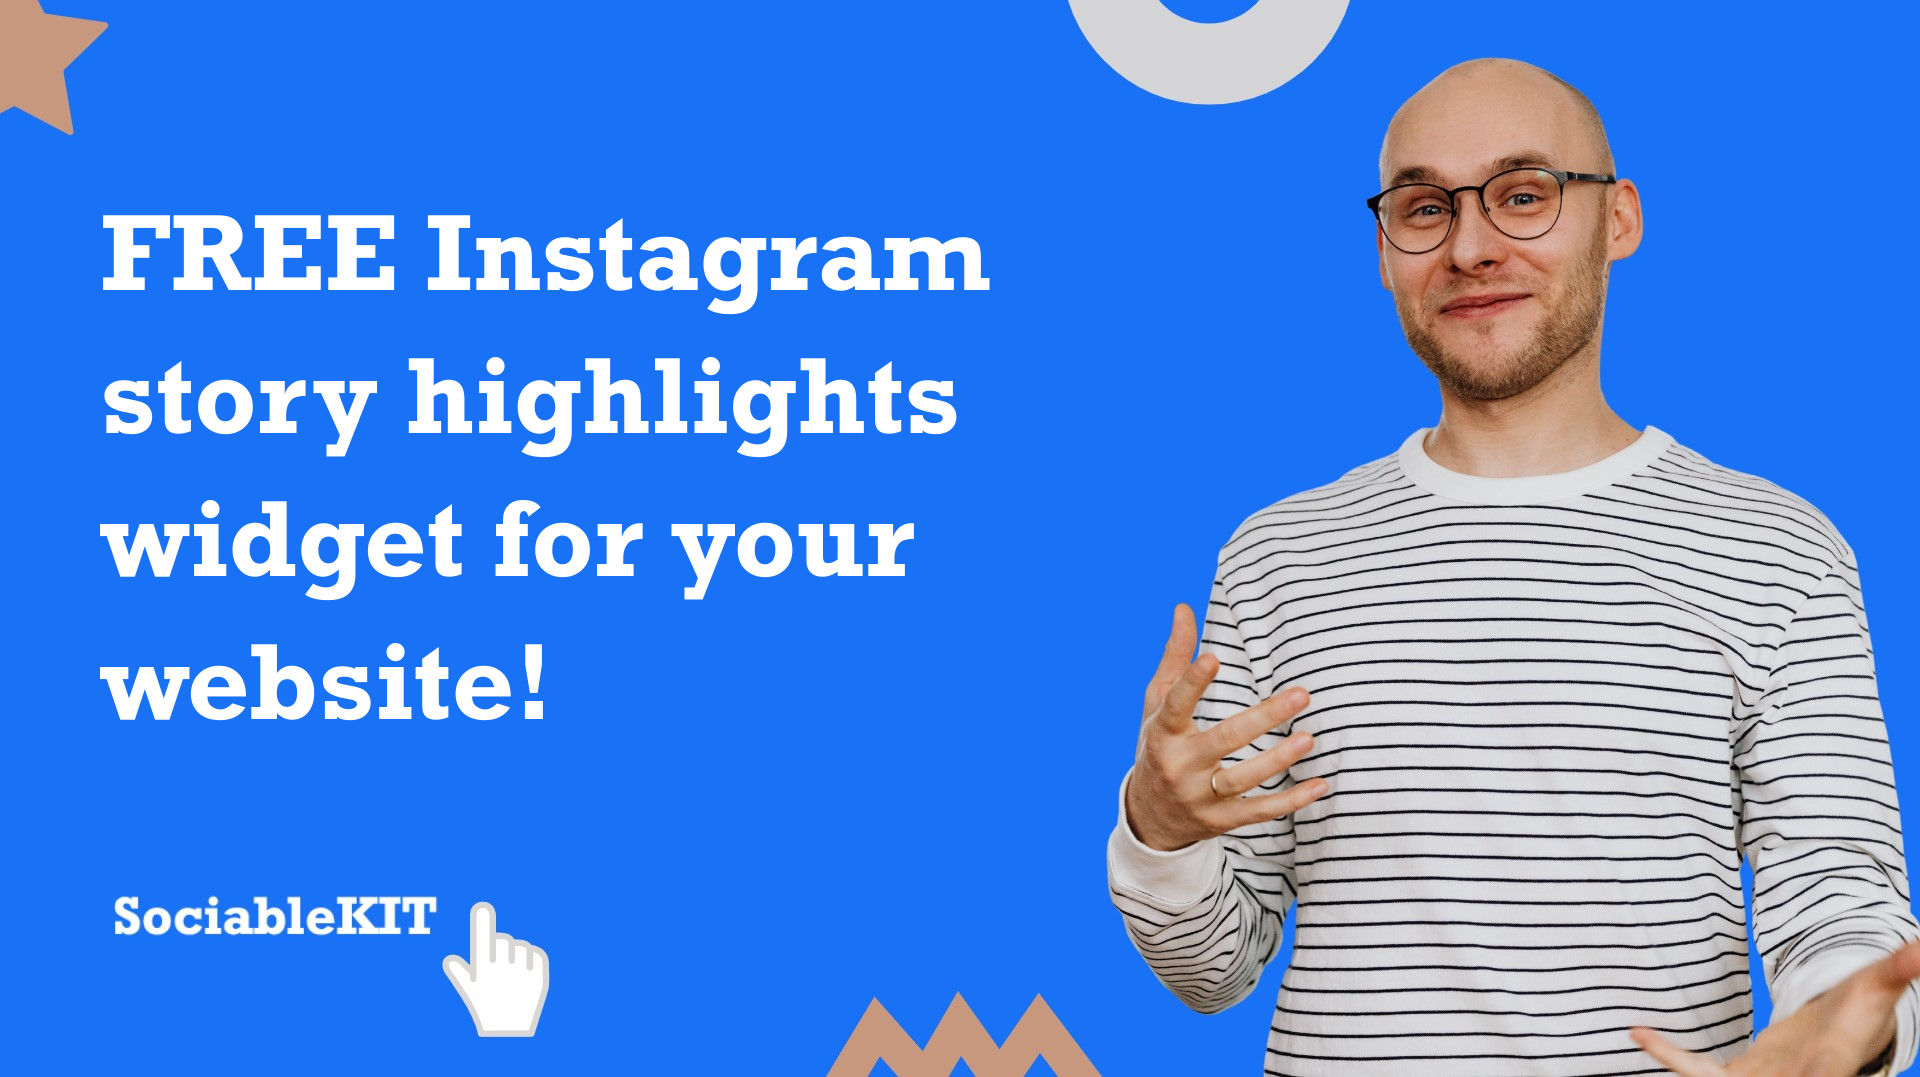 Free Instagram story highlights widget for your website